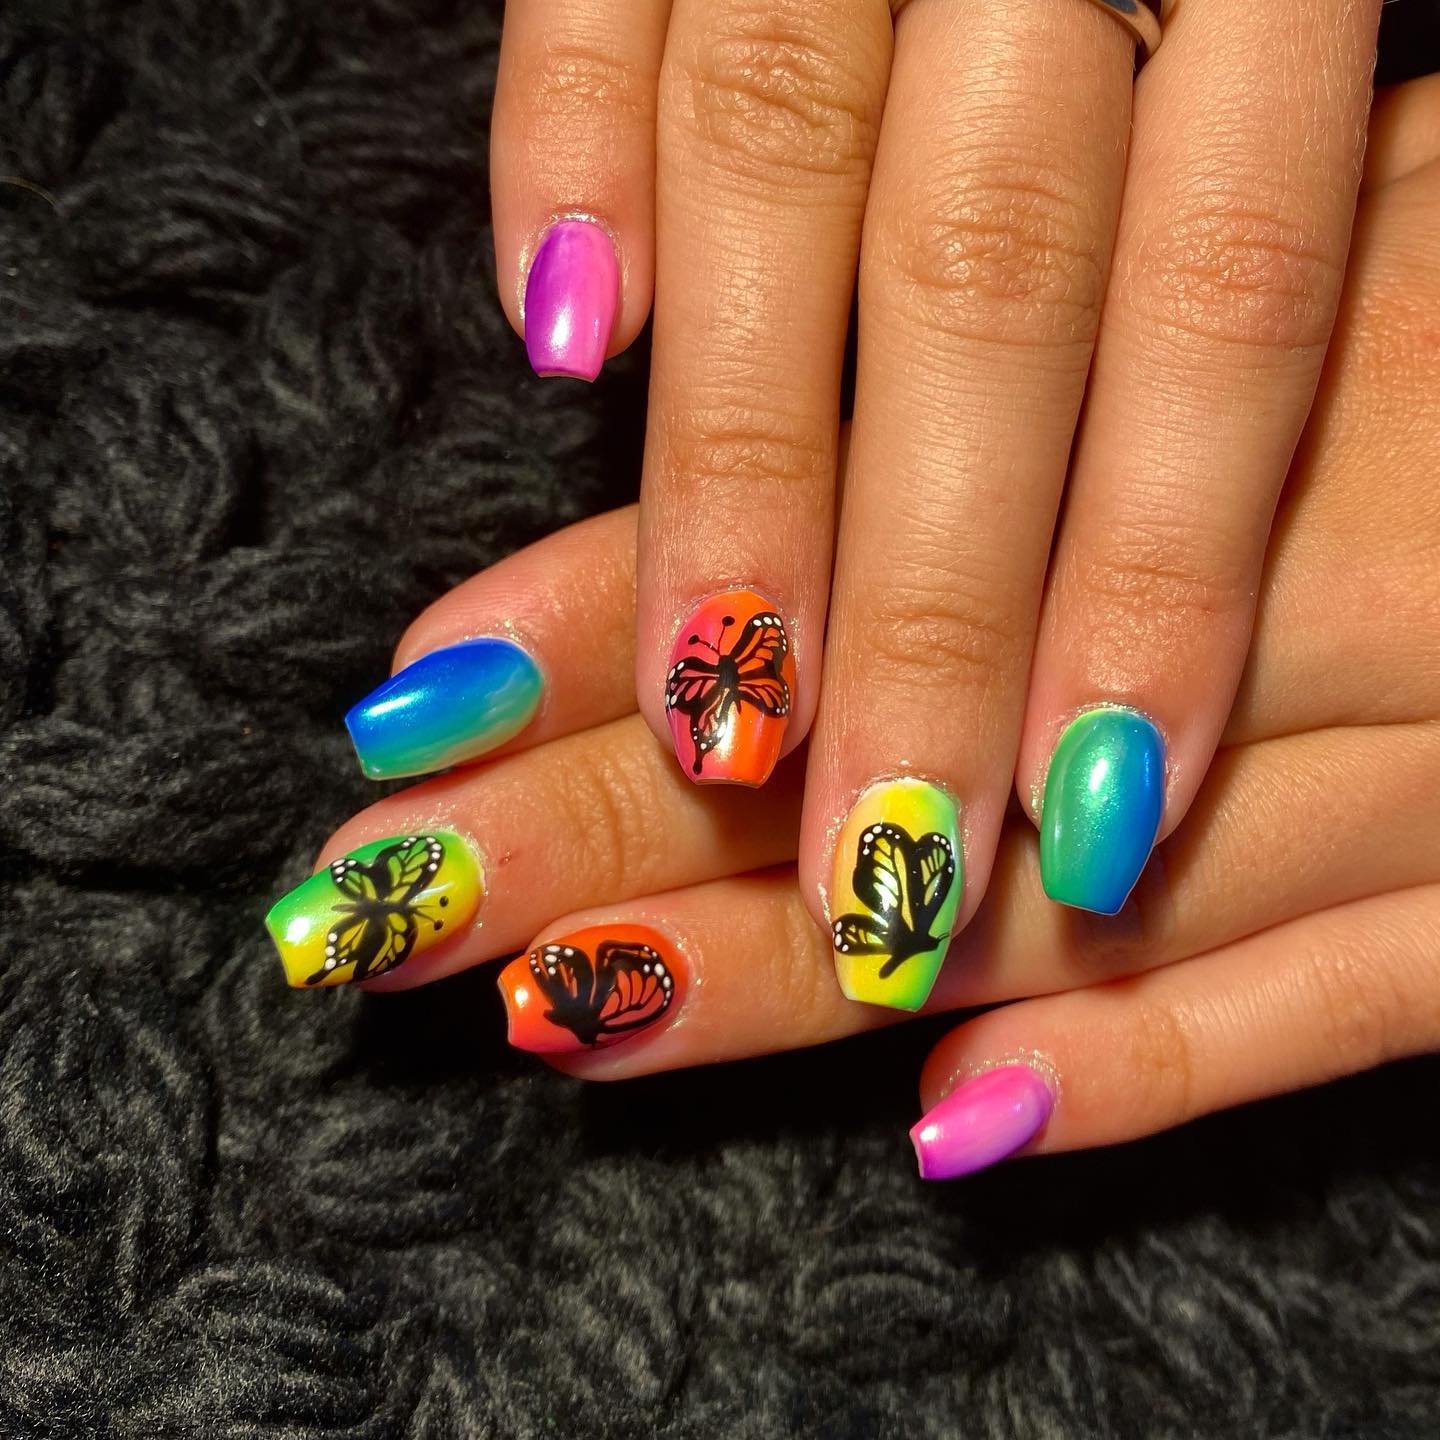 Colored nails are one of the favorites for summertime, aren't they? You can mix colors and create this nail design in a perfect way.